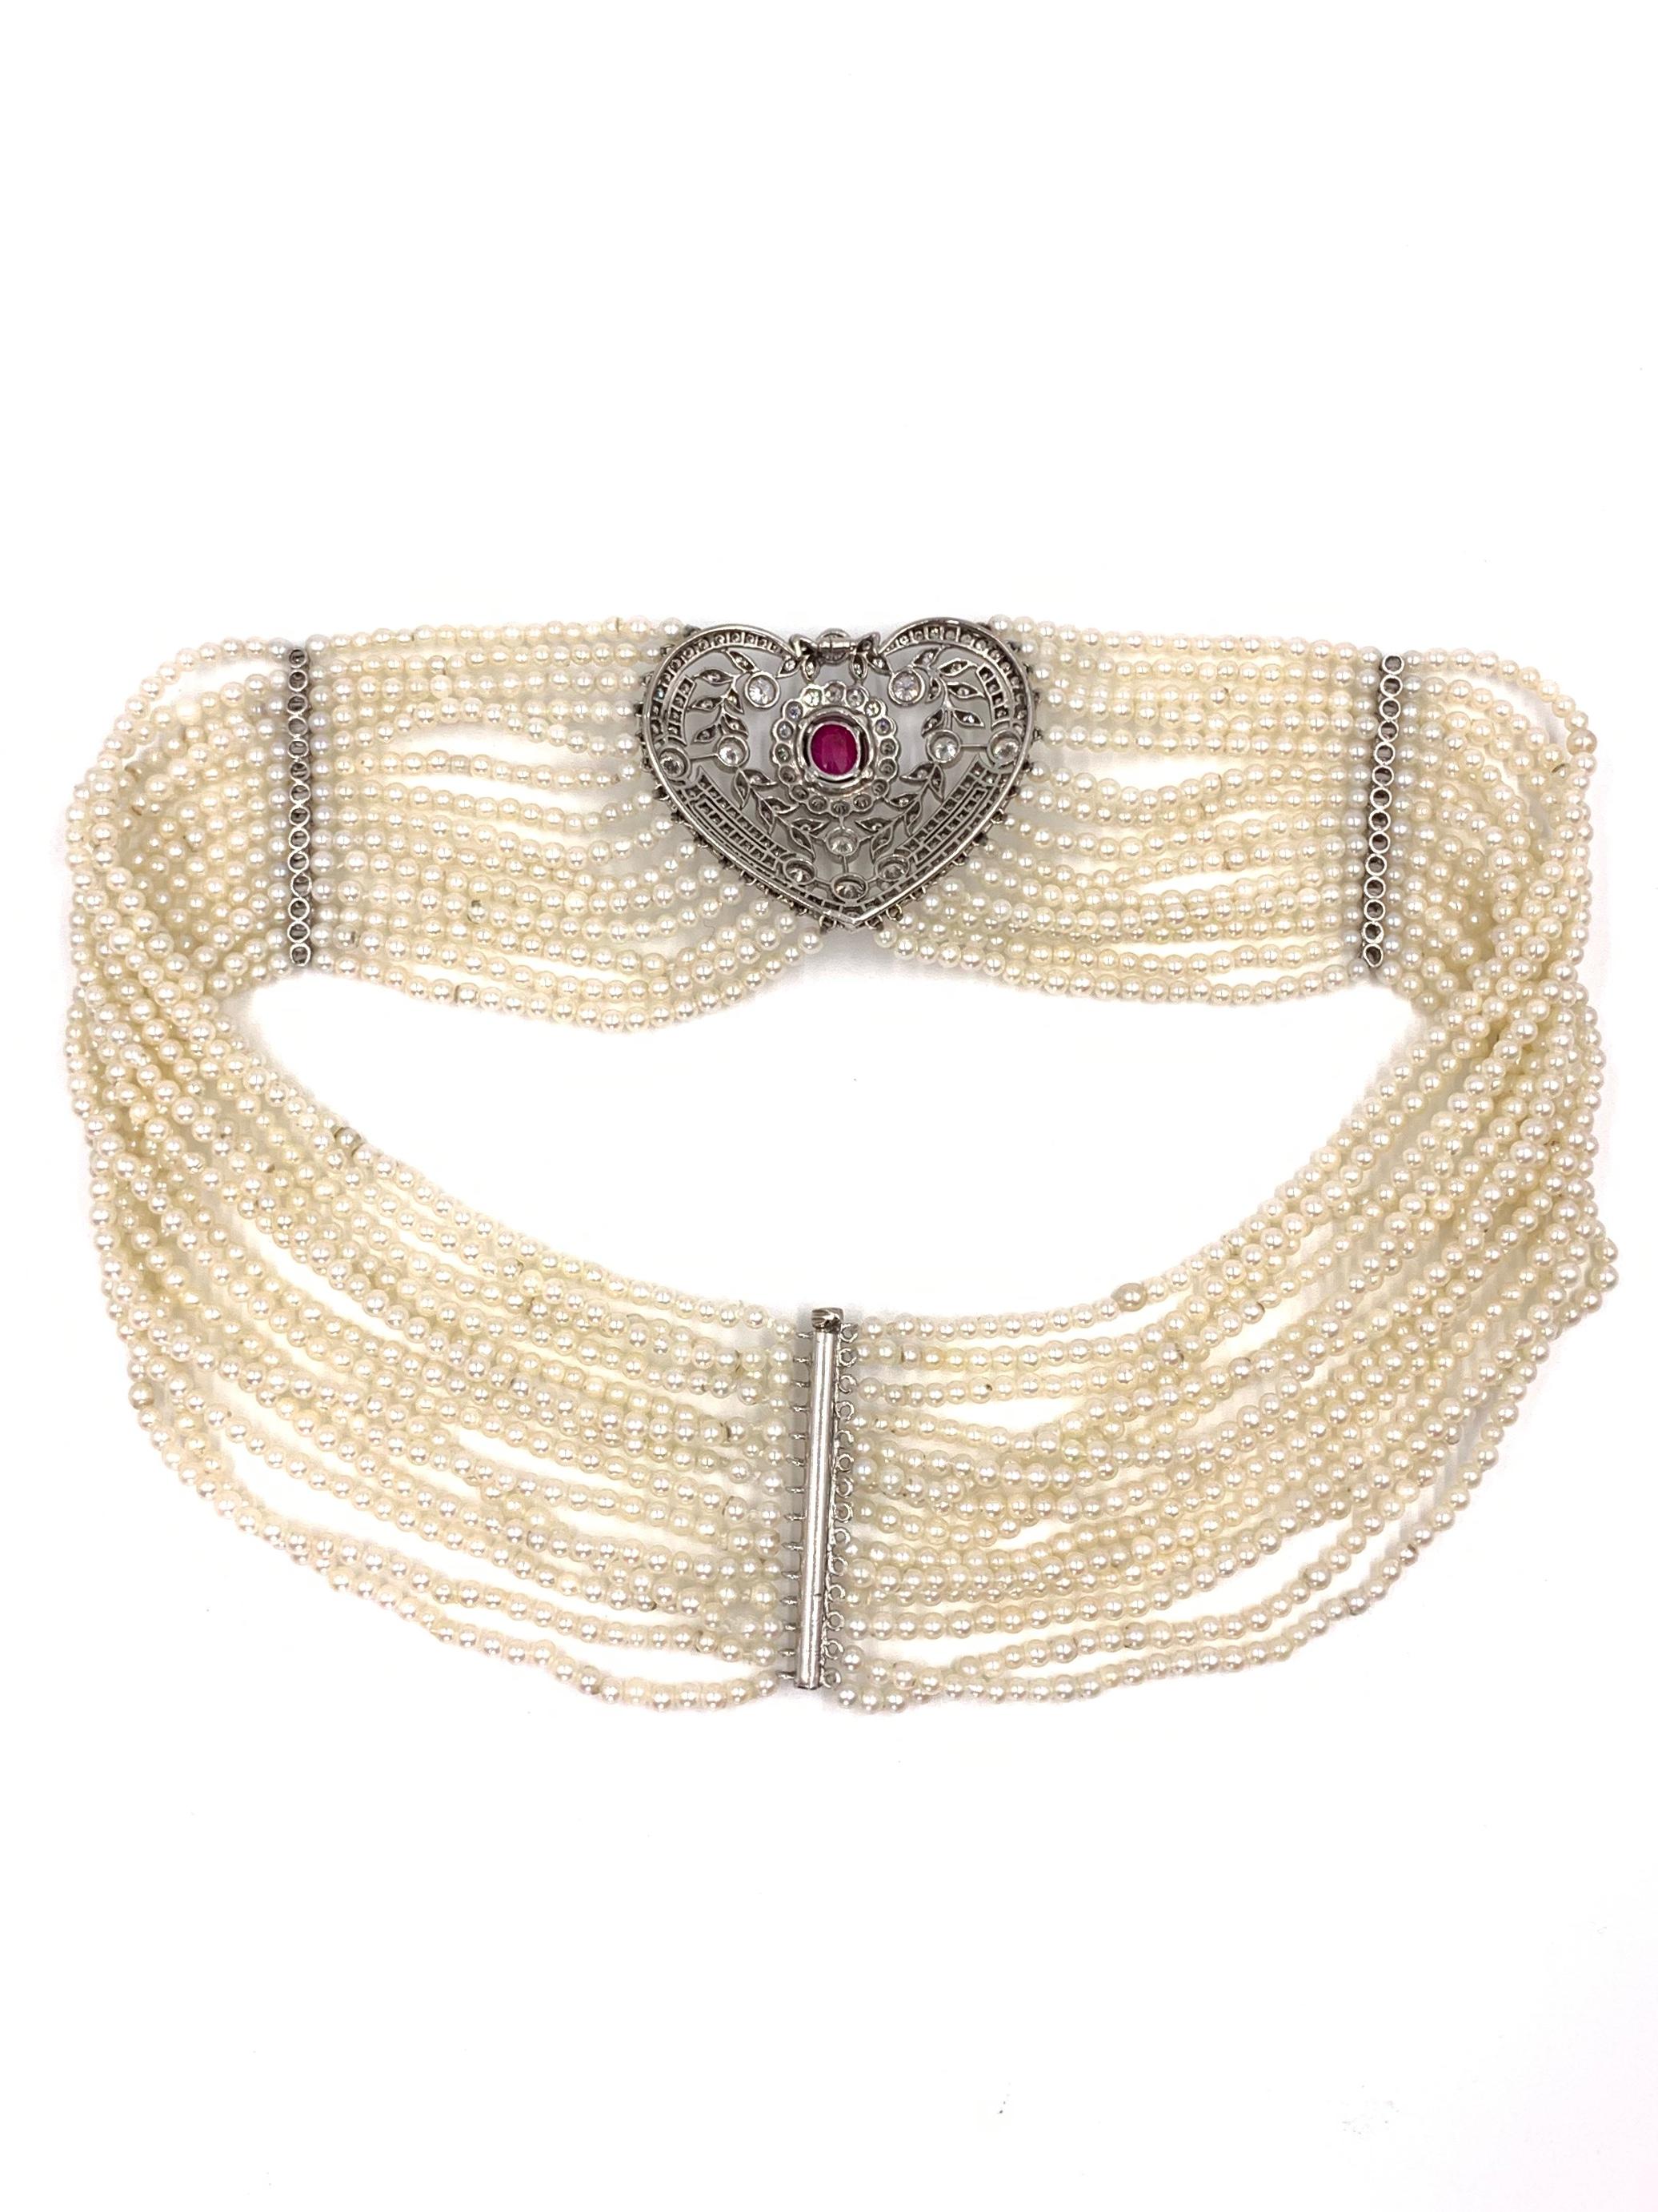 Victorian Inspired Ruby and Diamond Heart Shape Pearl Choker Necklace In Good Condition For Sale In Pikesville, MD